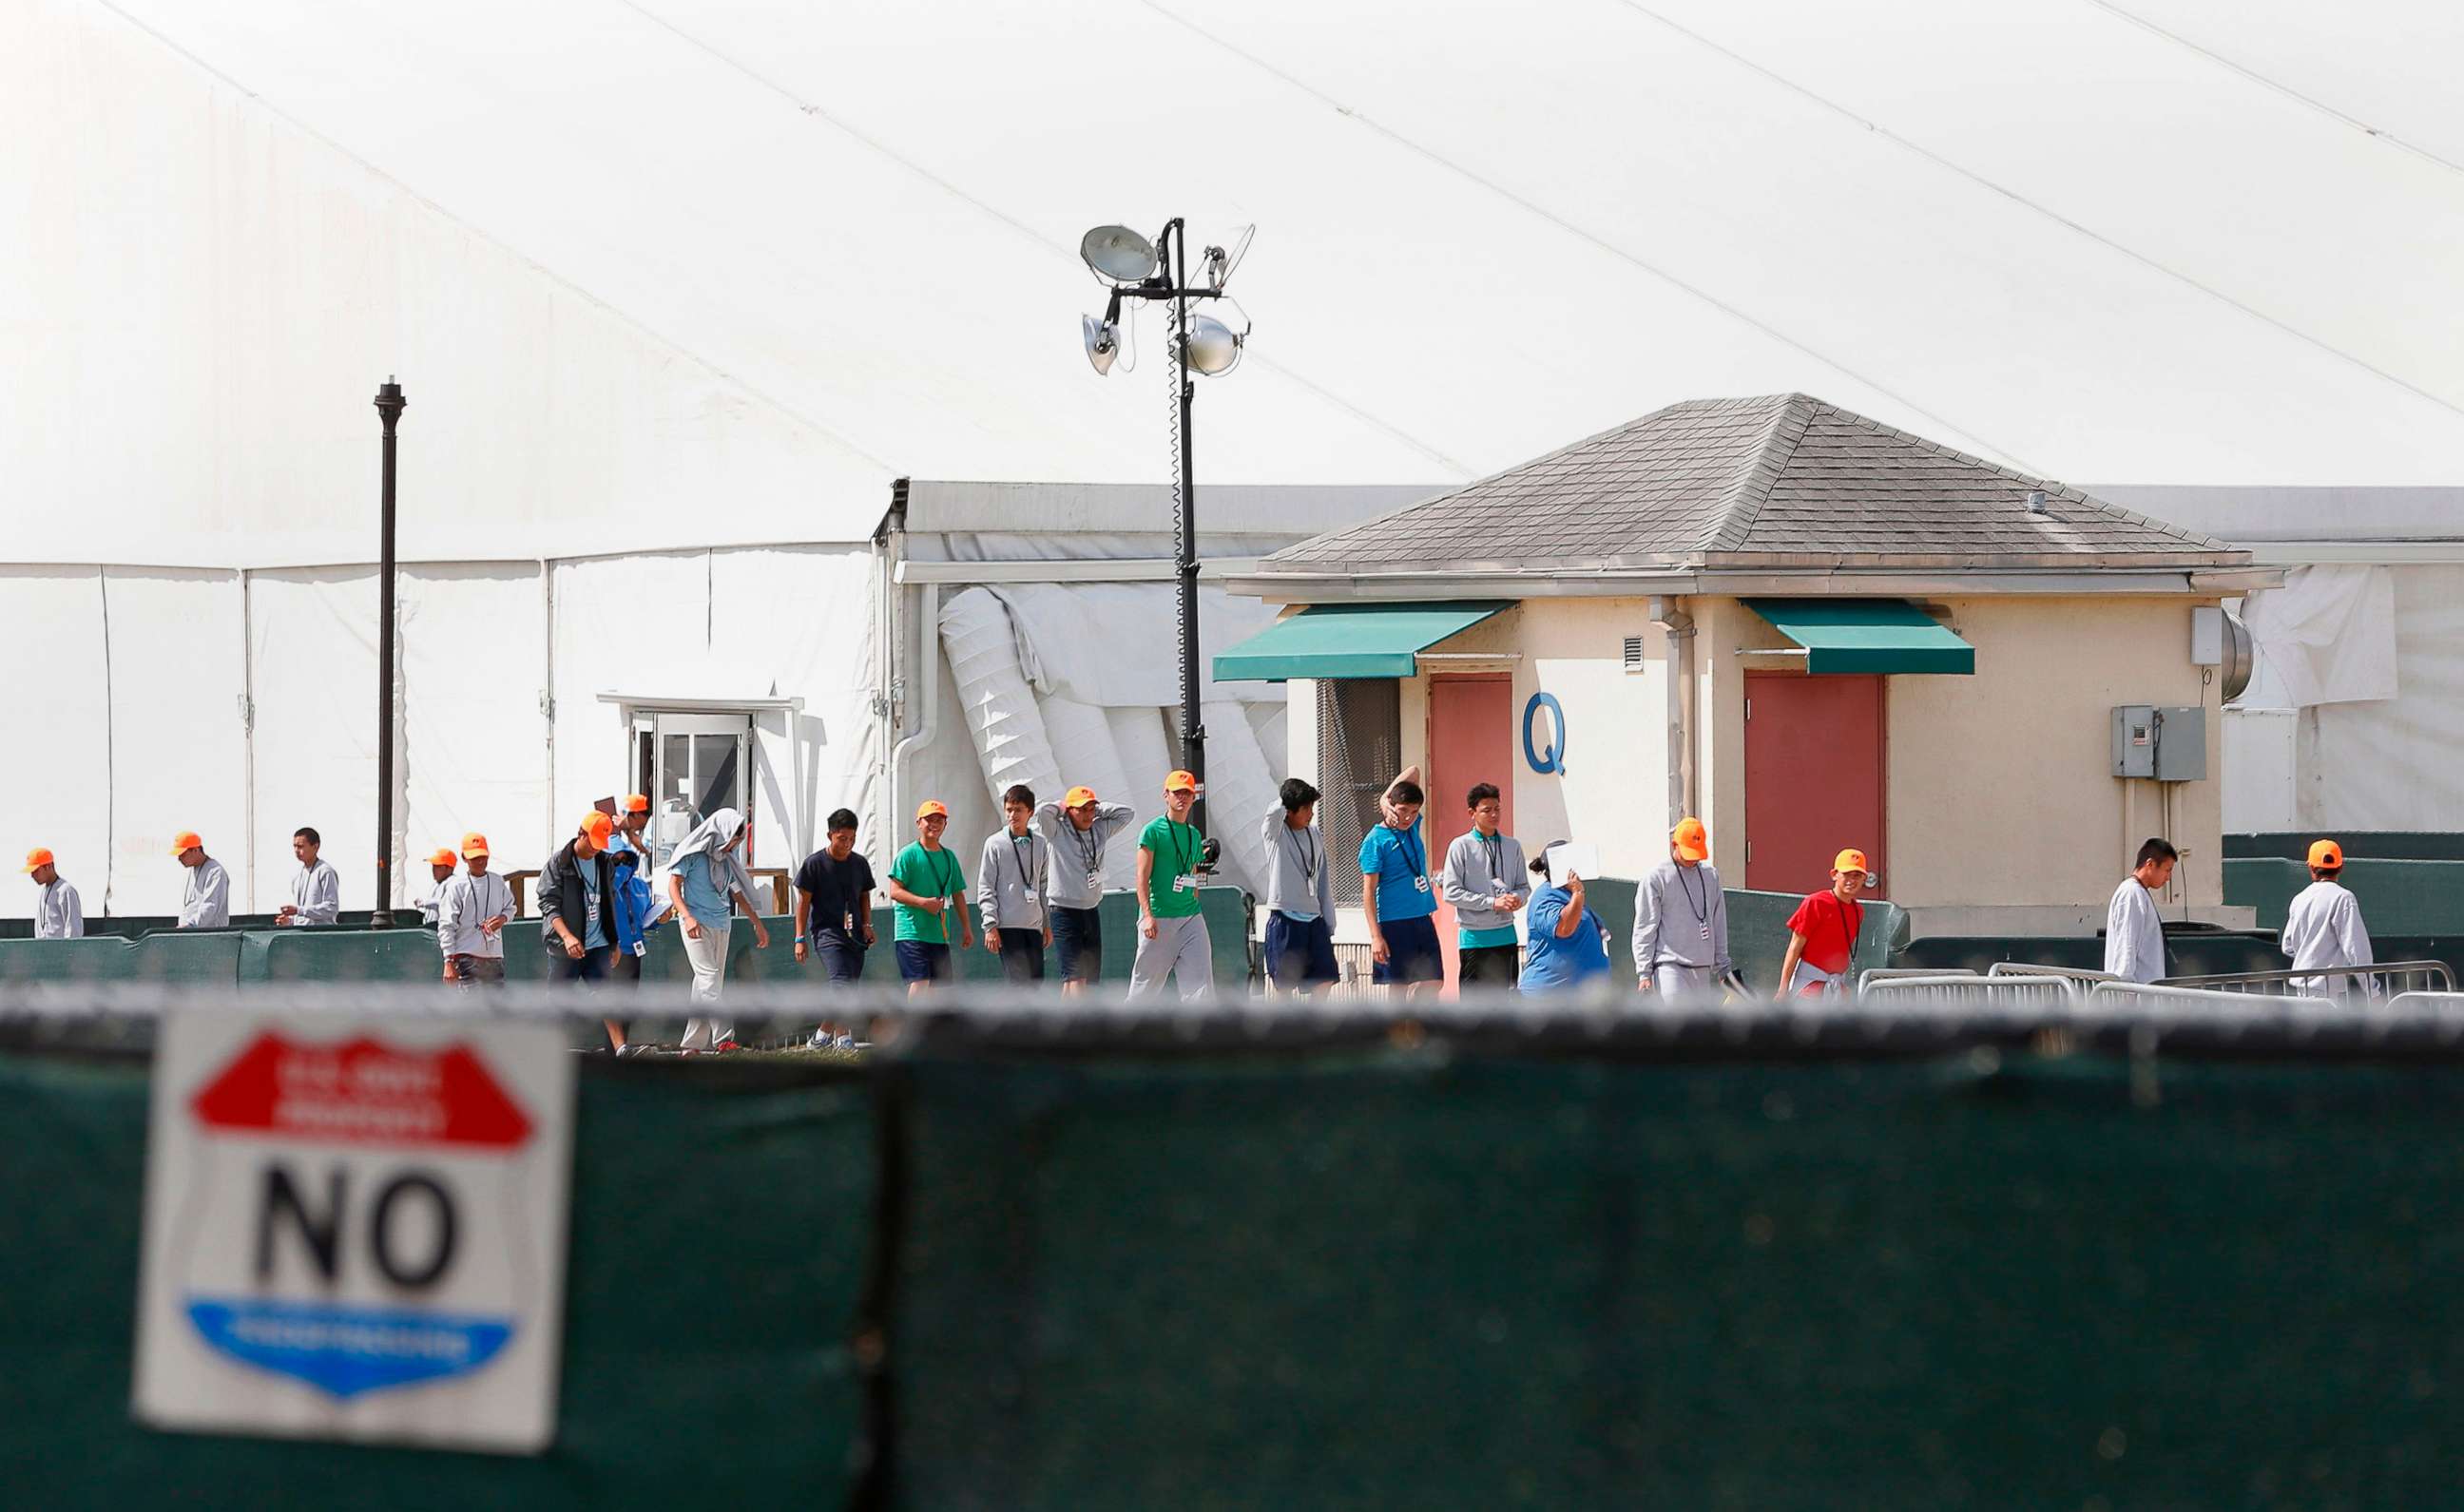 PHOTO: Migrant children who have been separated from their families walk outside shelters at a detention center in Homestead, Fla., June 27, 2019.